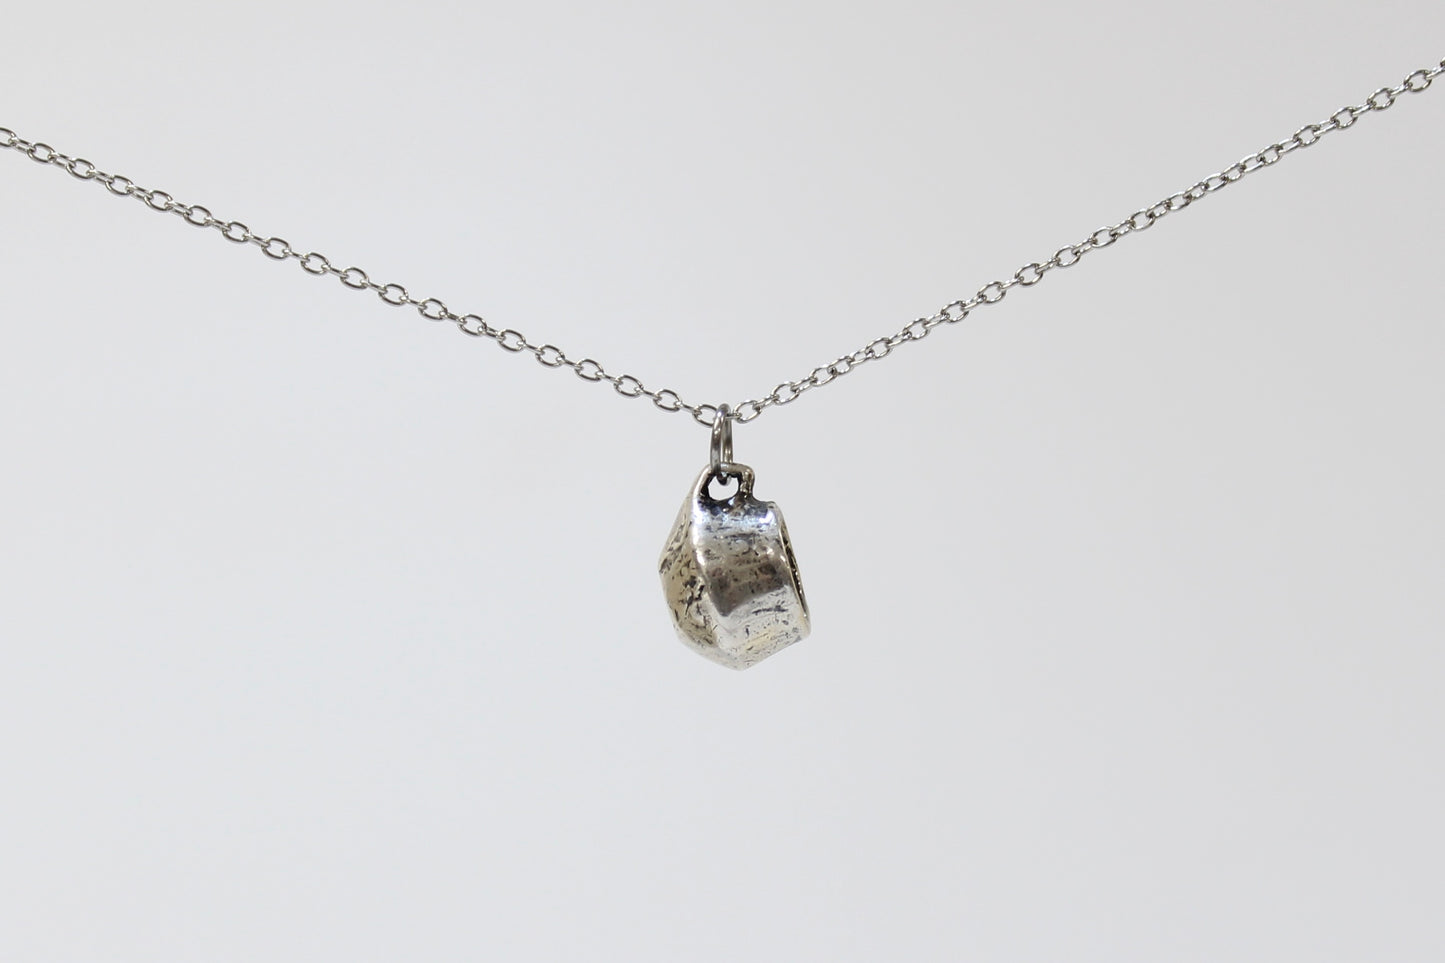 SILVER Mug Pendant Necklace. Sterling silver. .5" x .5". Select chain length 16, 18, 20 inch